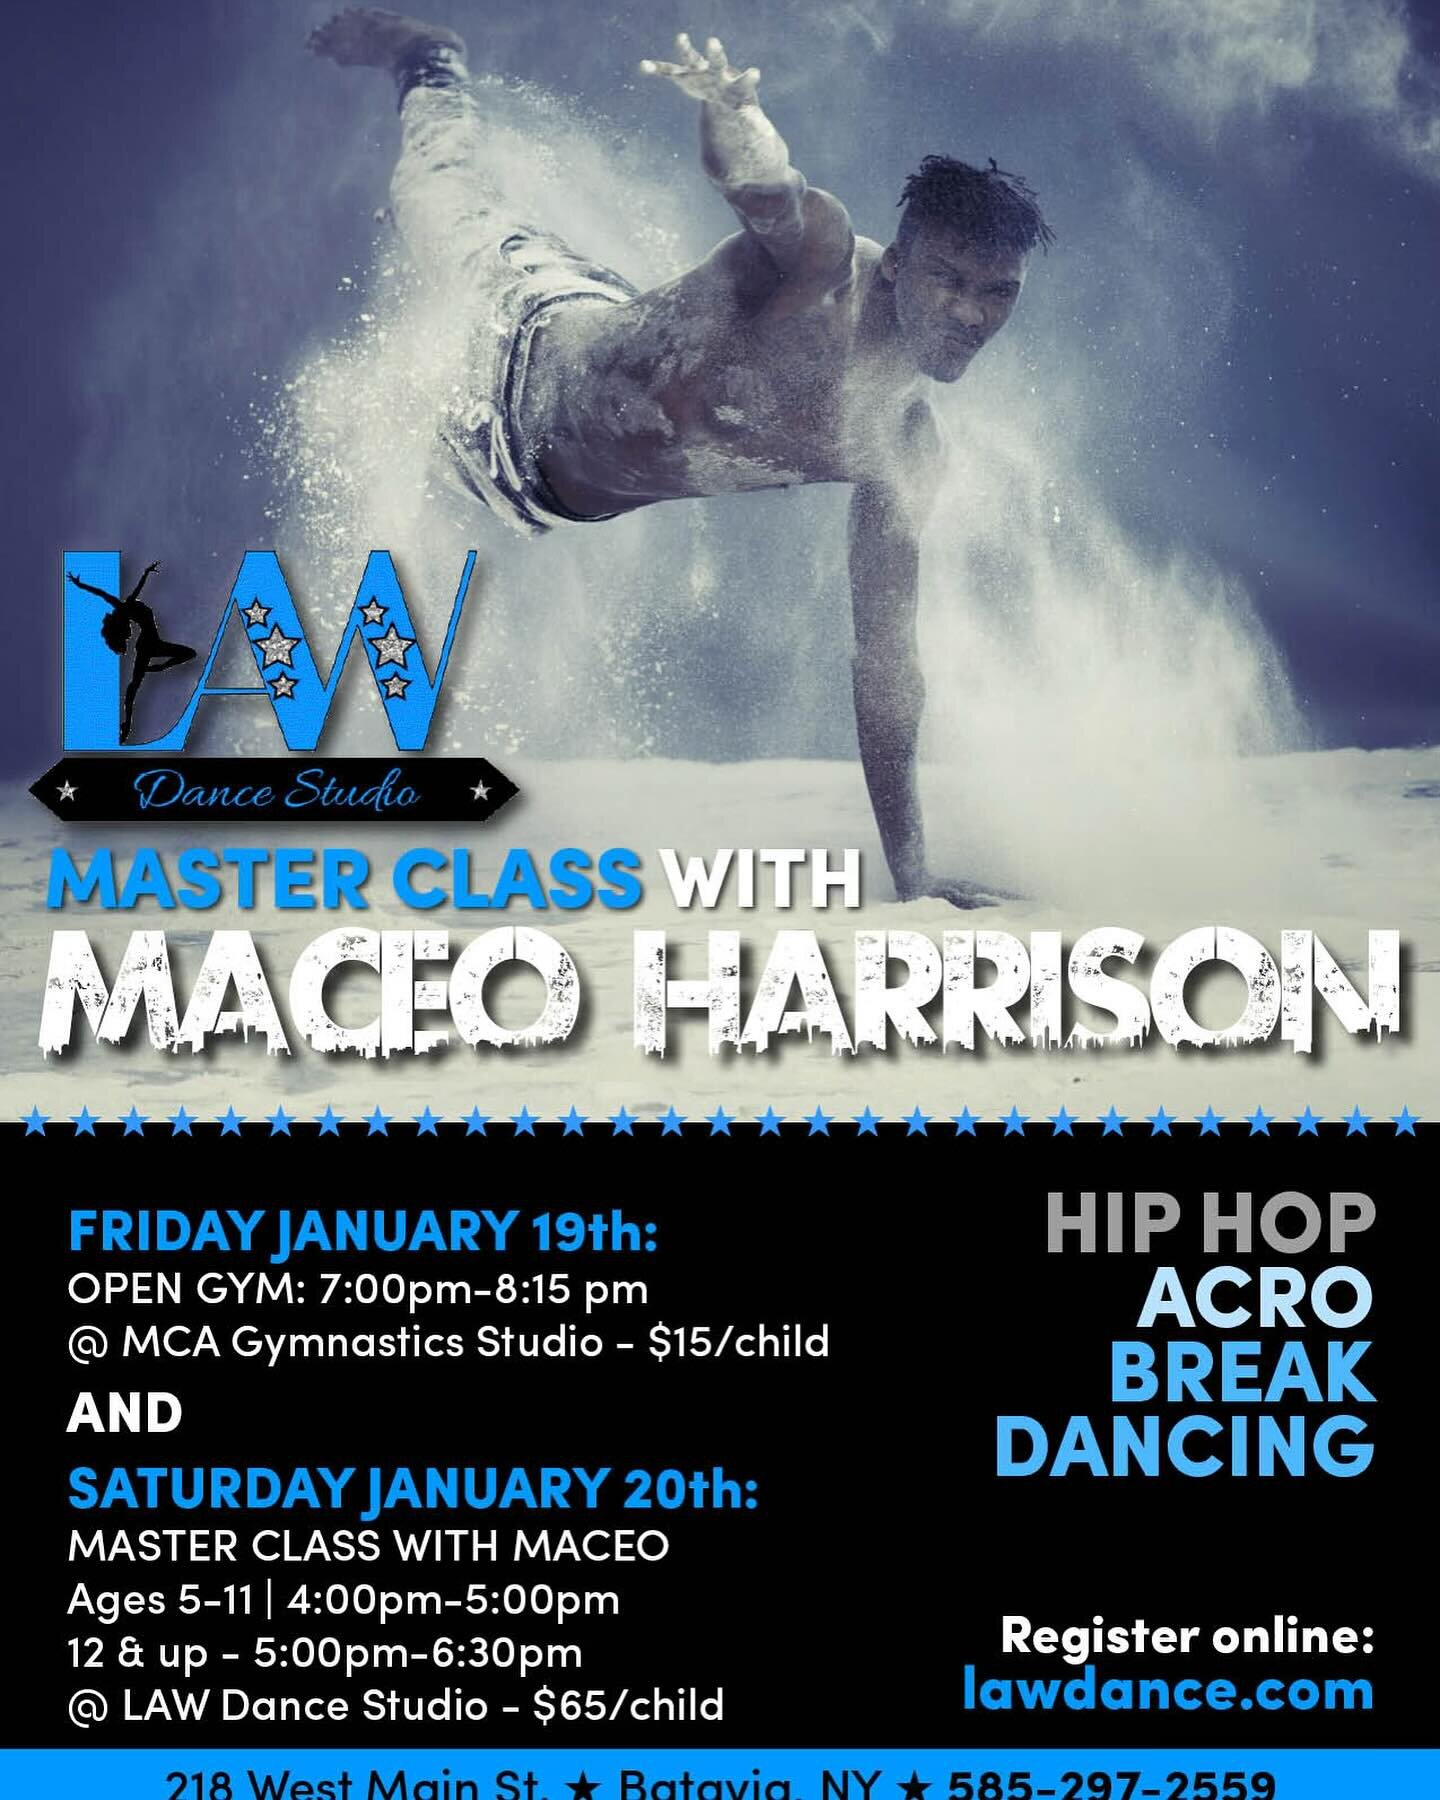 AHHHH!!! Run 🏃 don&rsquo;t walk to sign up for MACEO!!! If you haven&rsquo;t heard of the Savannah Bananas 🍌 LOOK THEM UP! Come dance with THE dancing 1st base coach &amp; my bestie!! We LOVE when Maceo comes to visit! 💙🖤💙